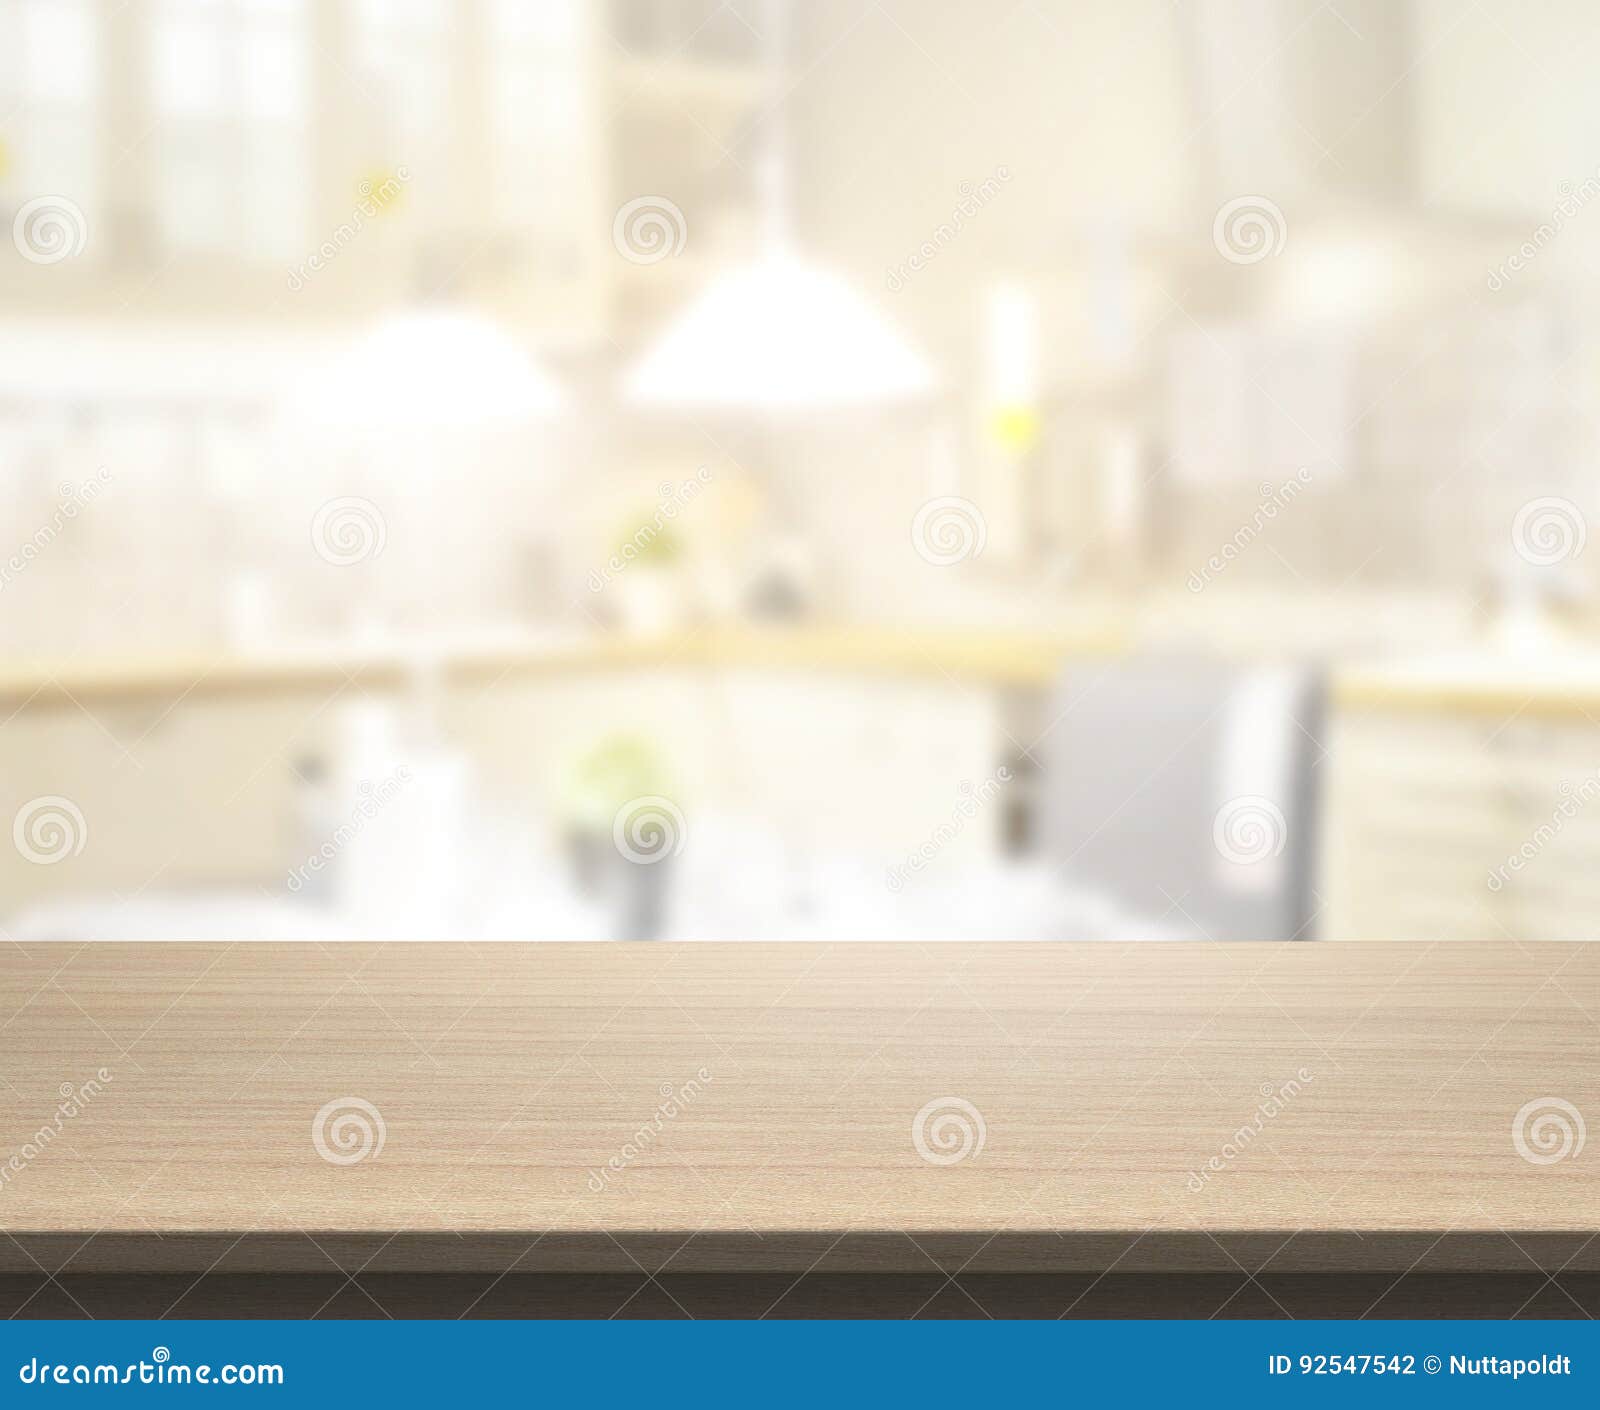 Table Top and Blur Kitchen Room of Background Stock Photo - Image of ...